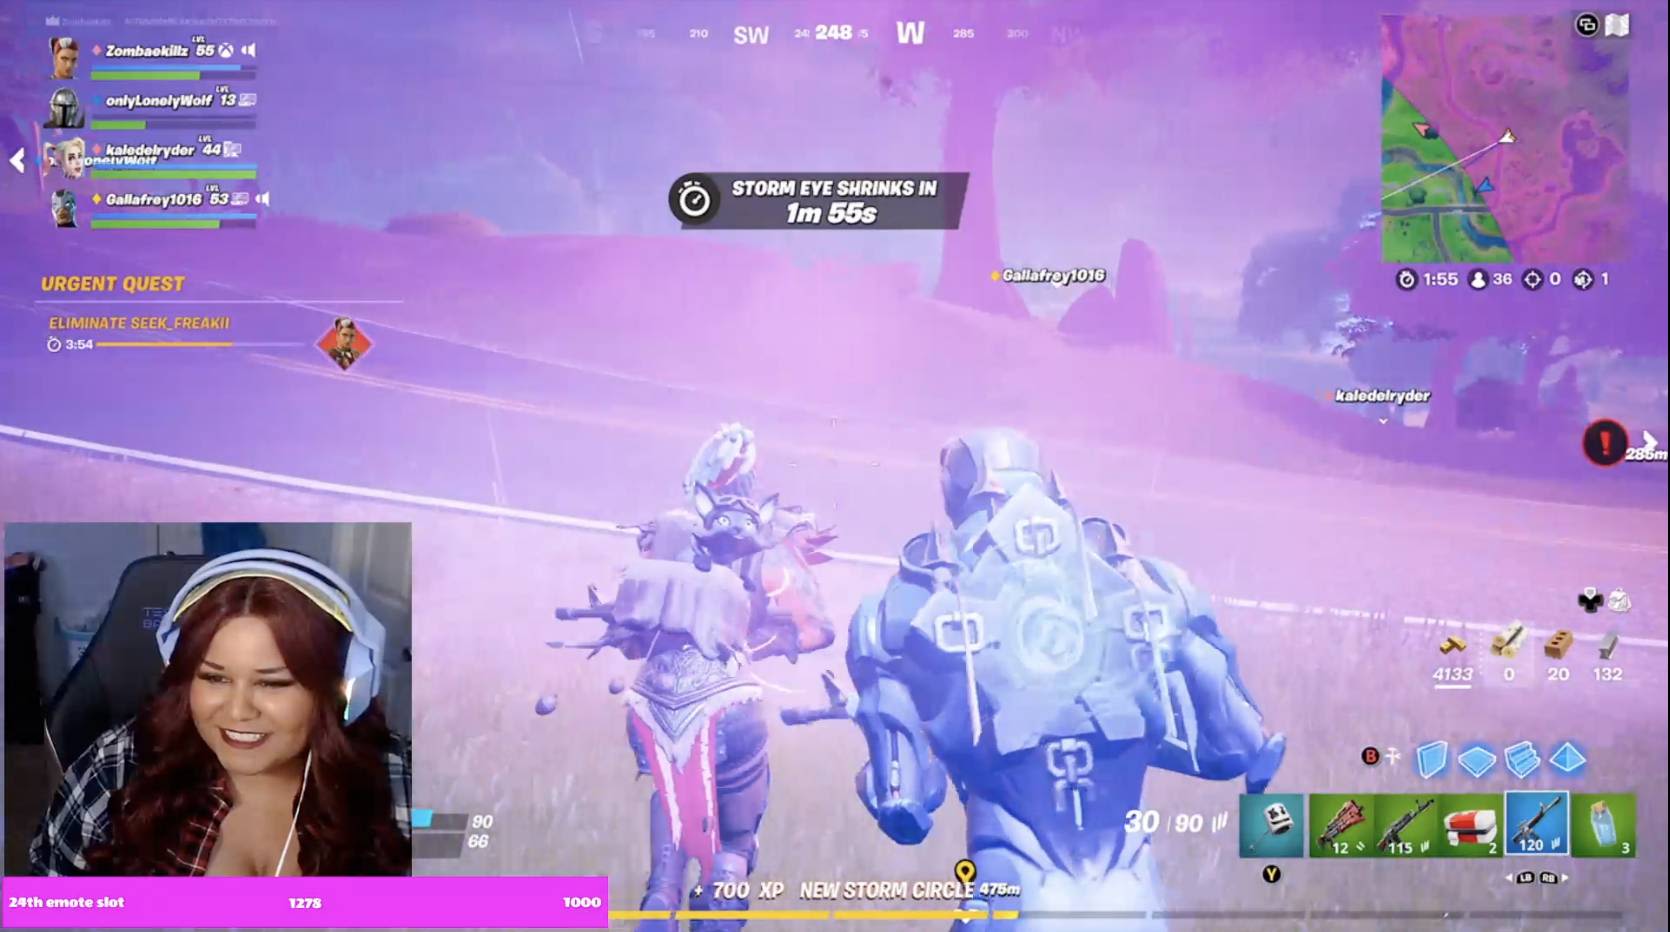 s Live-Streaming service Twitch.tv showing game titles as a